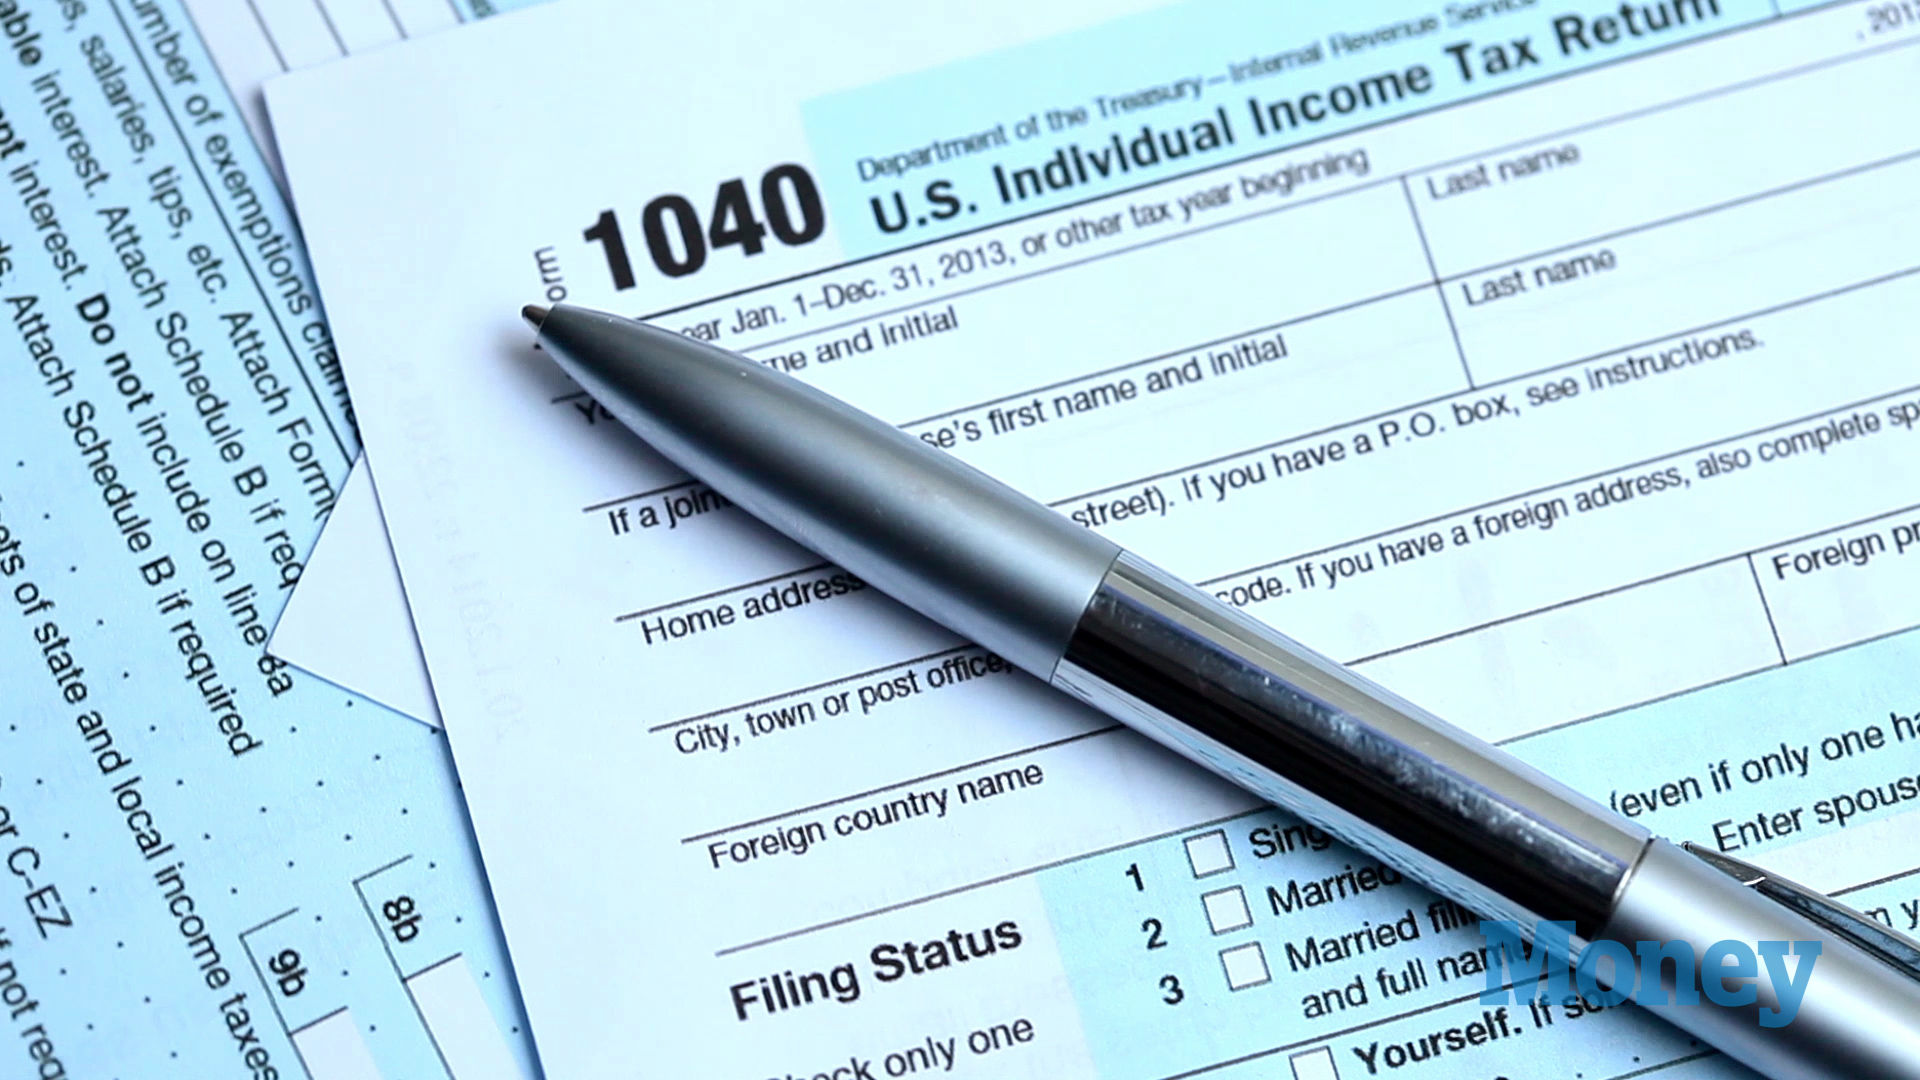 Protect Yourself From Tax Refund Fraud